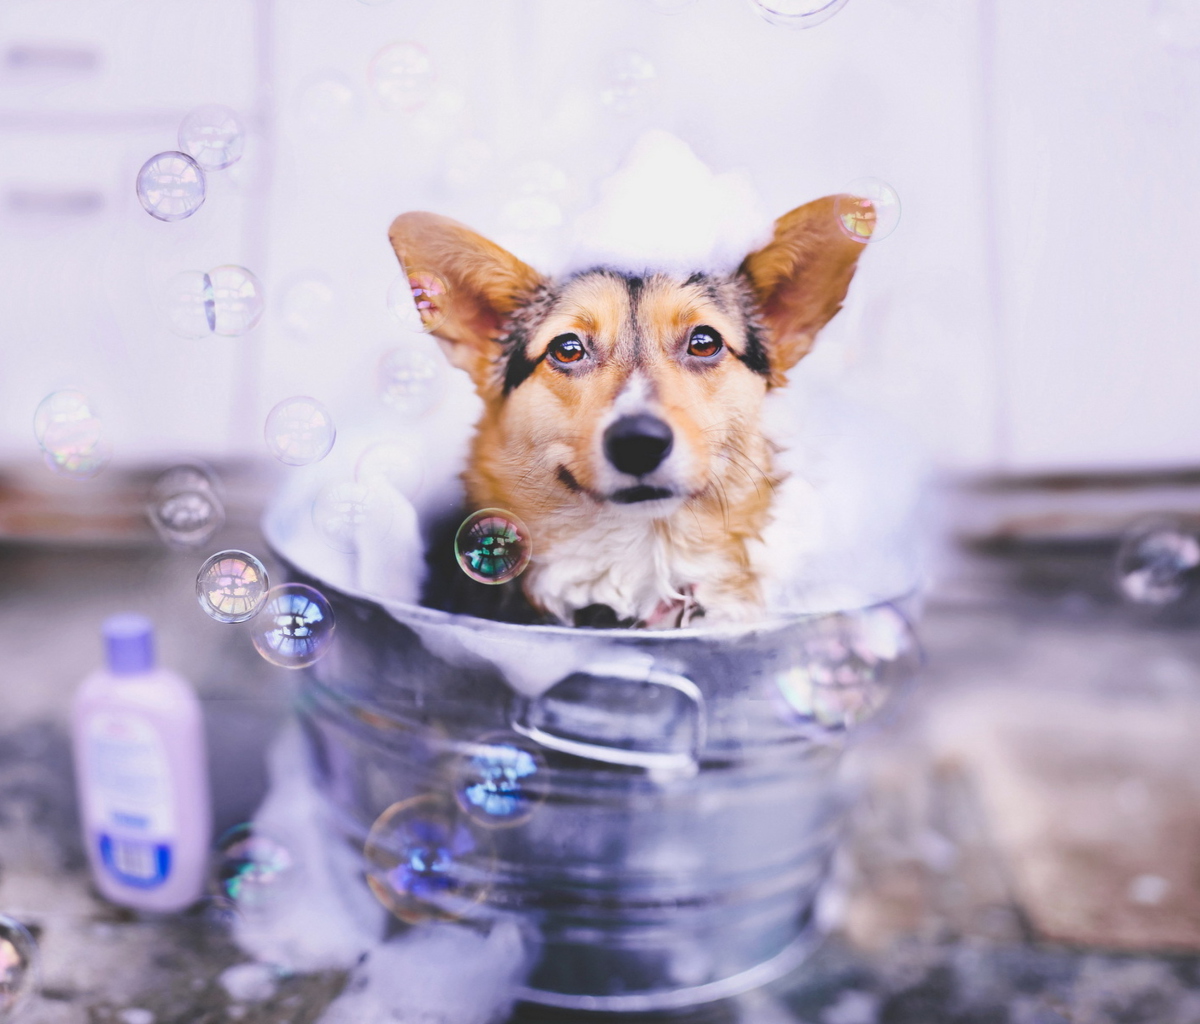 Dog And Bubbles wallpaper 1200x1024